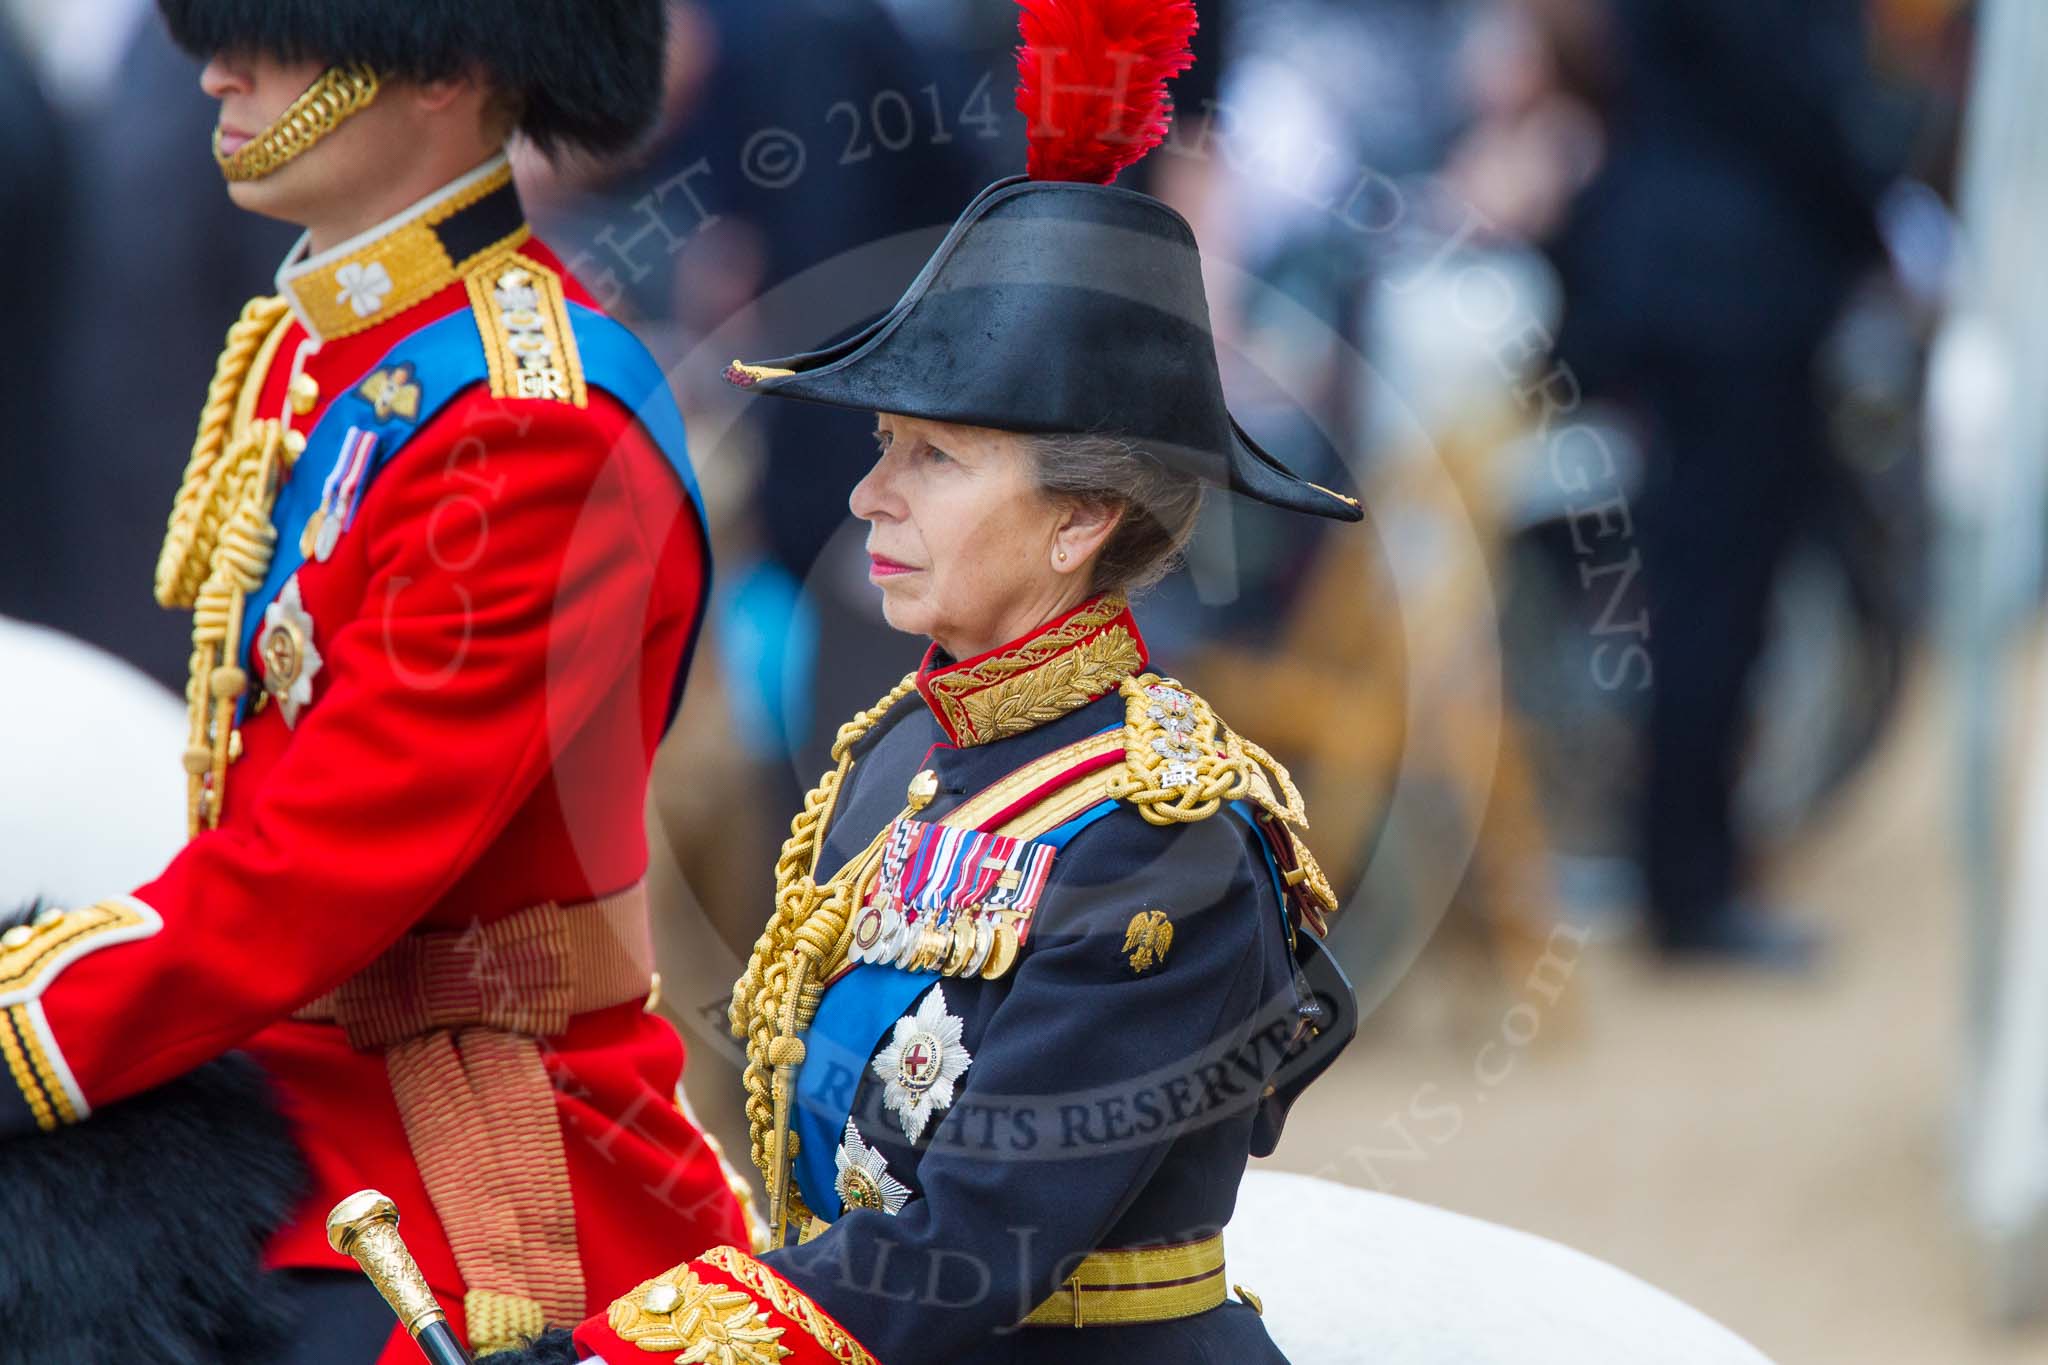 Trooping the Colour 2014.
Horse Guards Parade, Westminster,
London SW1A,

United Kingdom,
on 14 June 2014 at 11:01, image #379